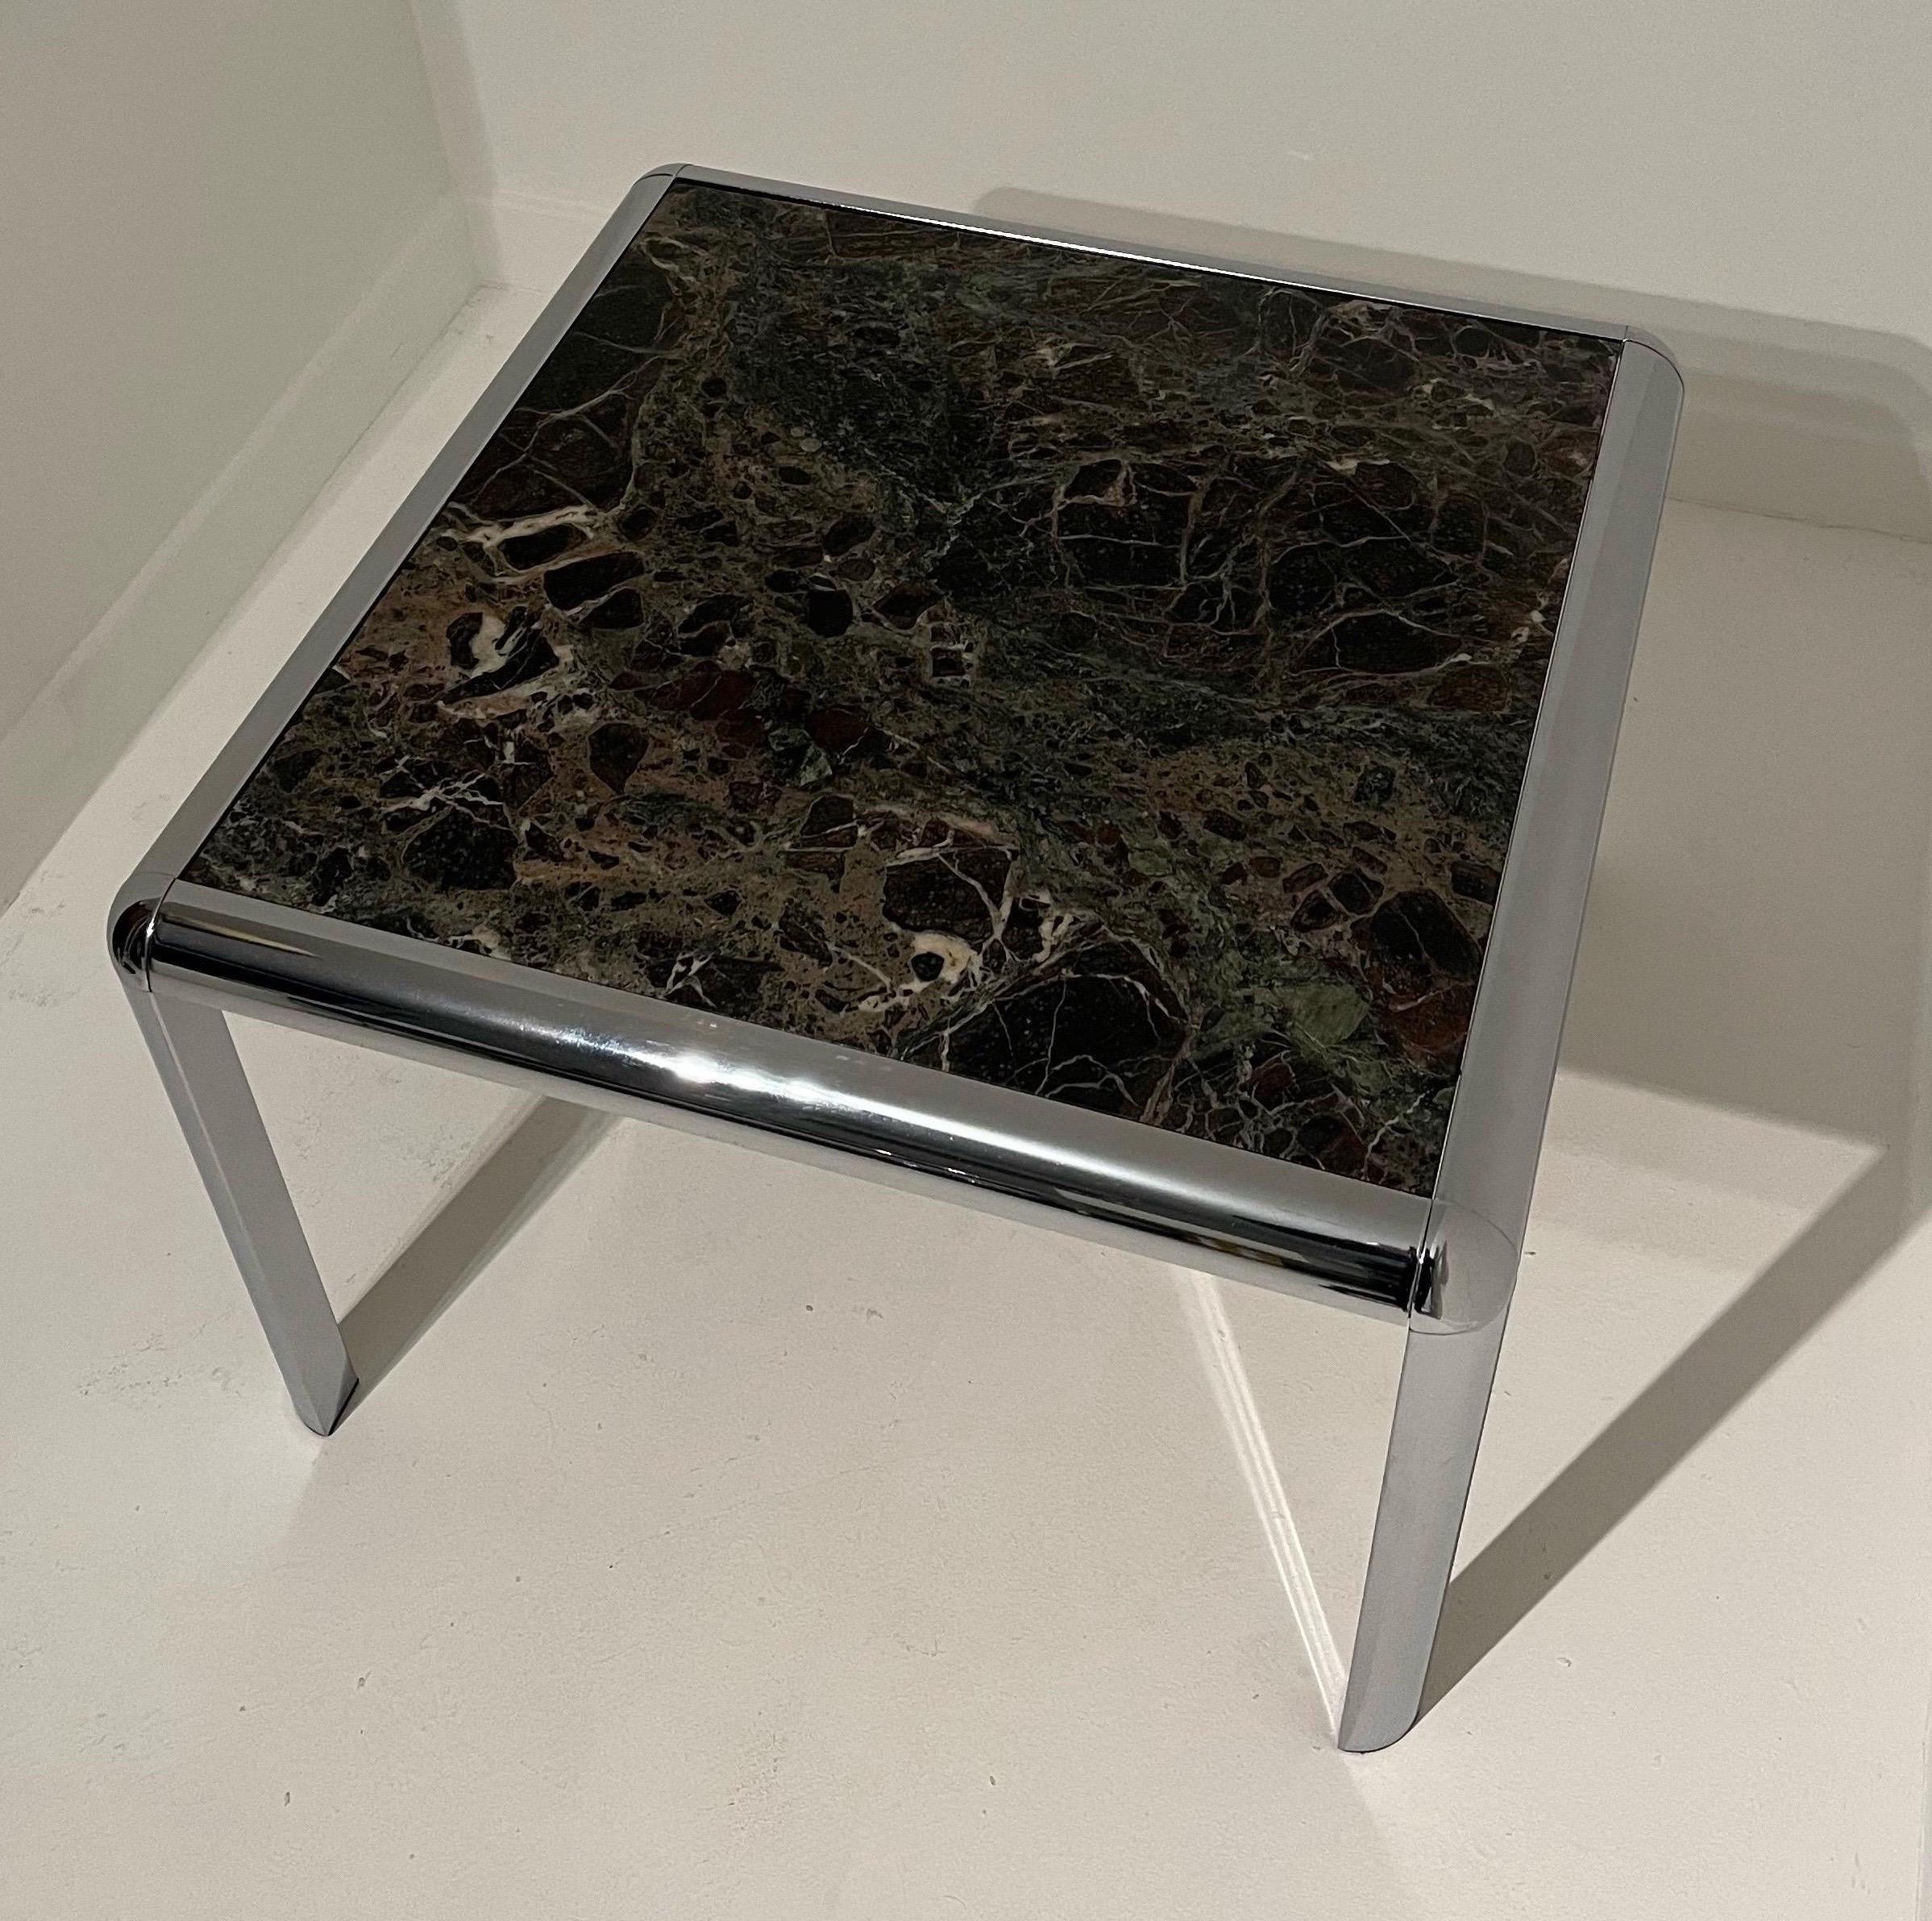 Beautiful Marble and Chrome Coffee Table.
Heavy chrome base with rounded shoulders. 
Similar styles found in Italy and in America under DIA. 
Marble has some very light scratches but overall very good condition. Chrome is in excellent condition. 